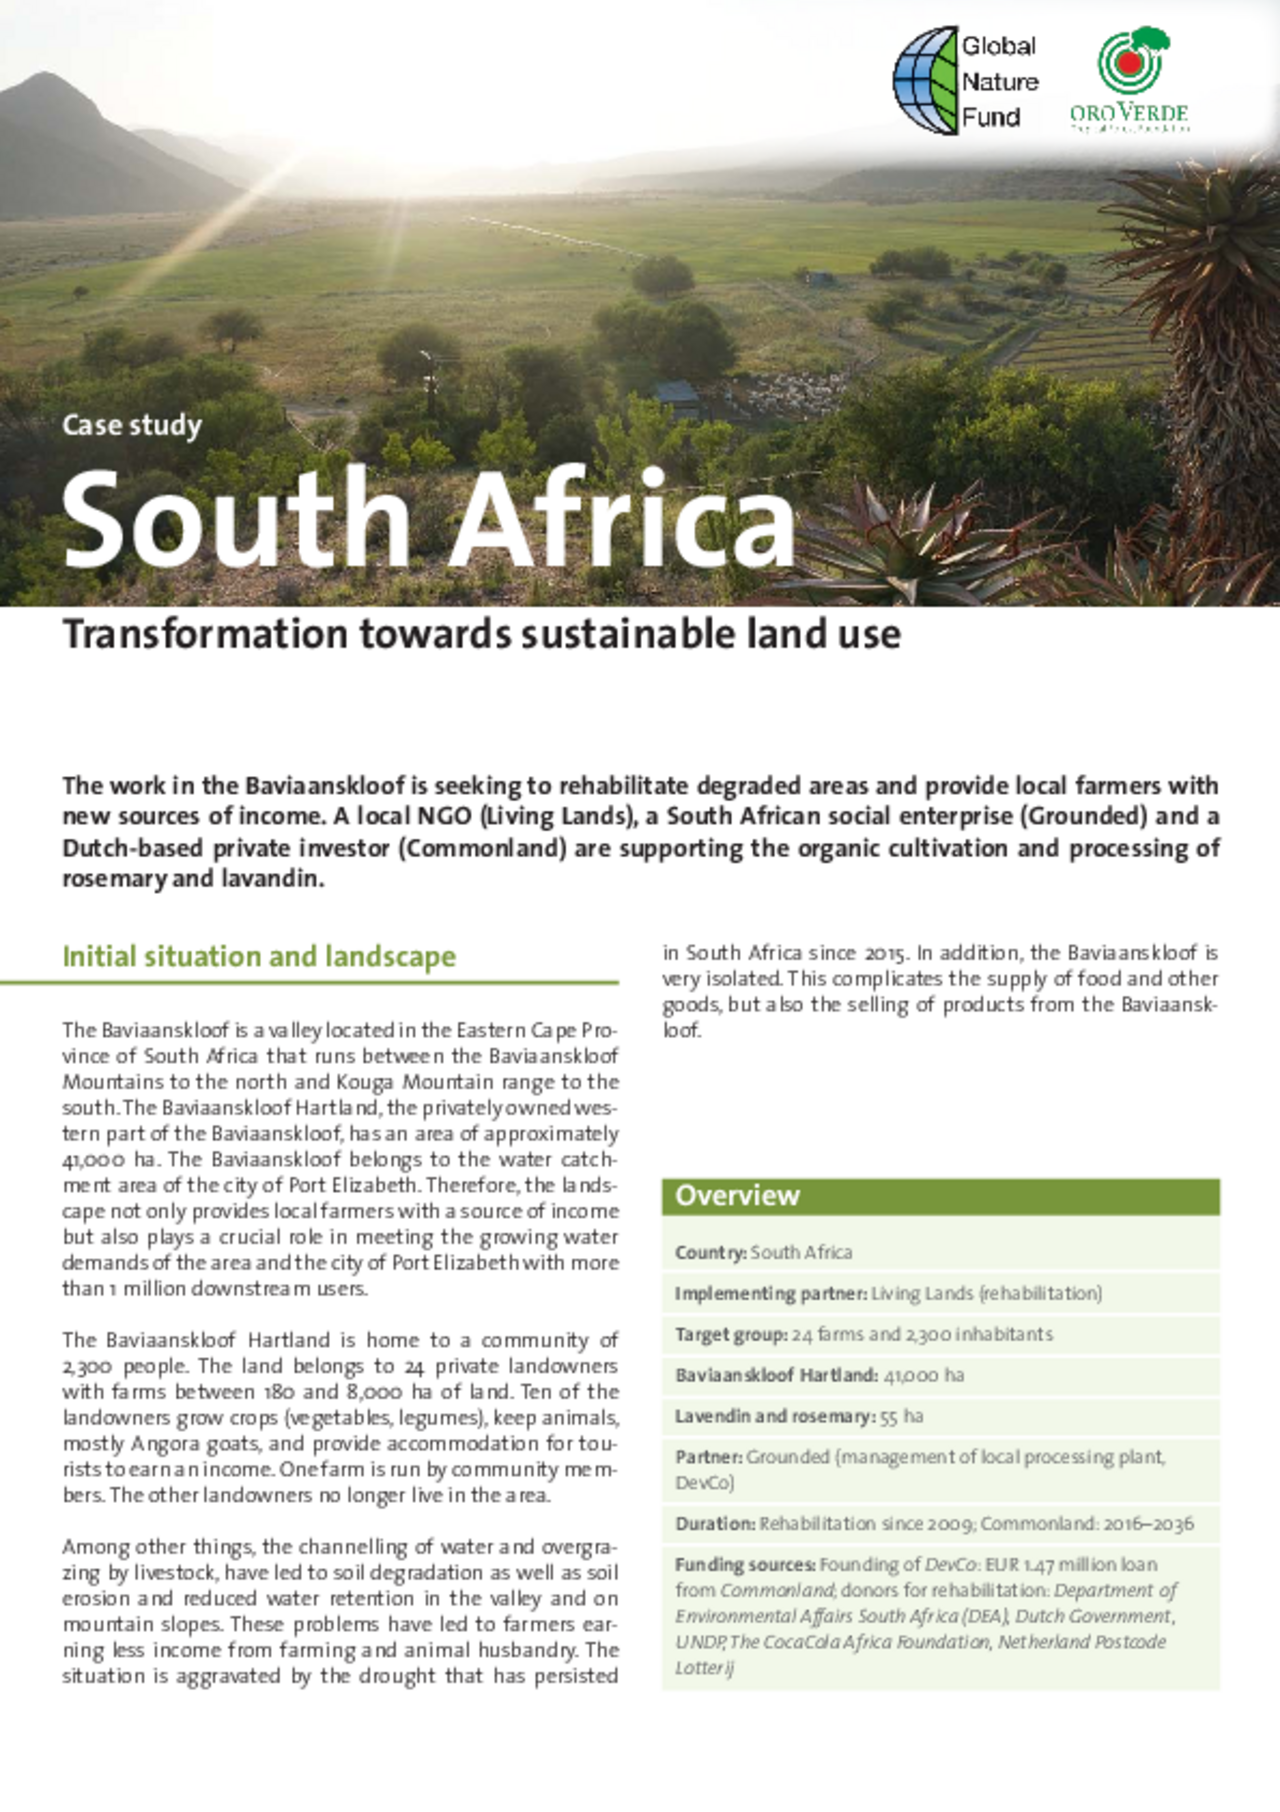 Case Study South Africa